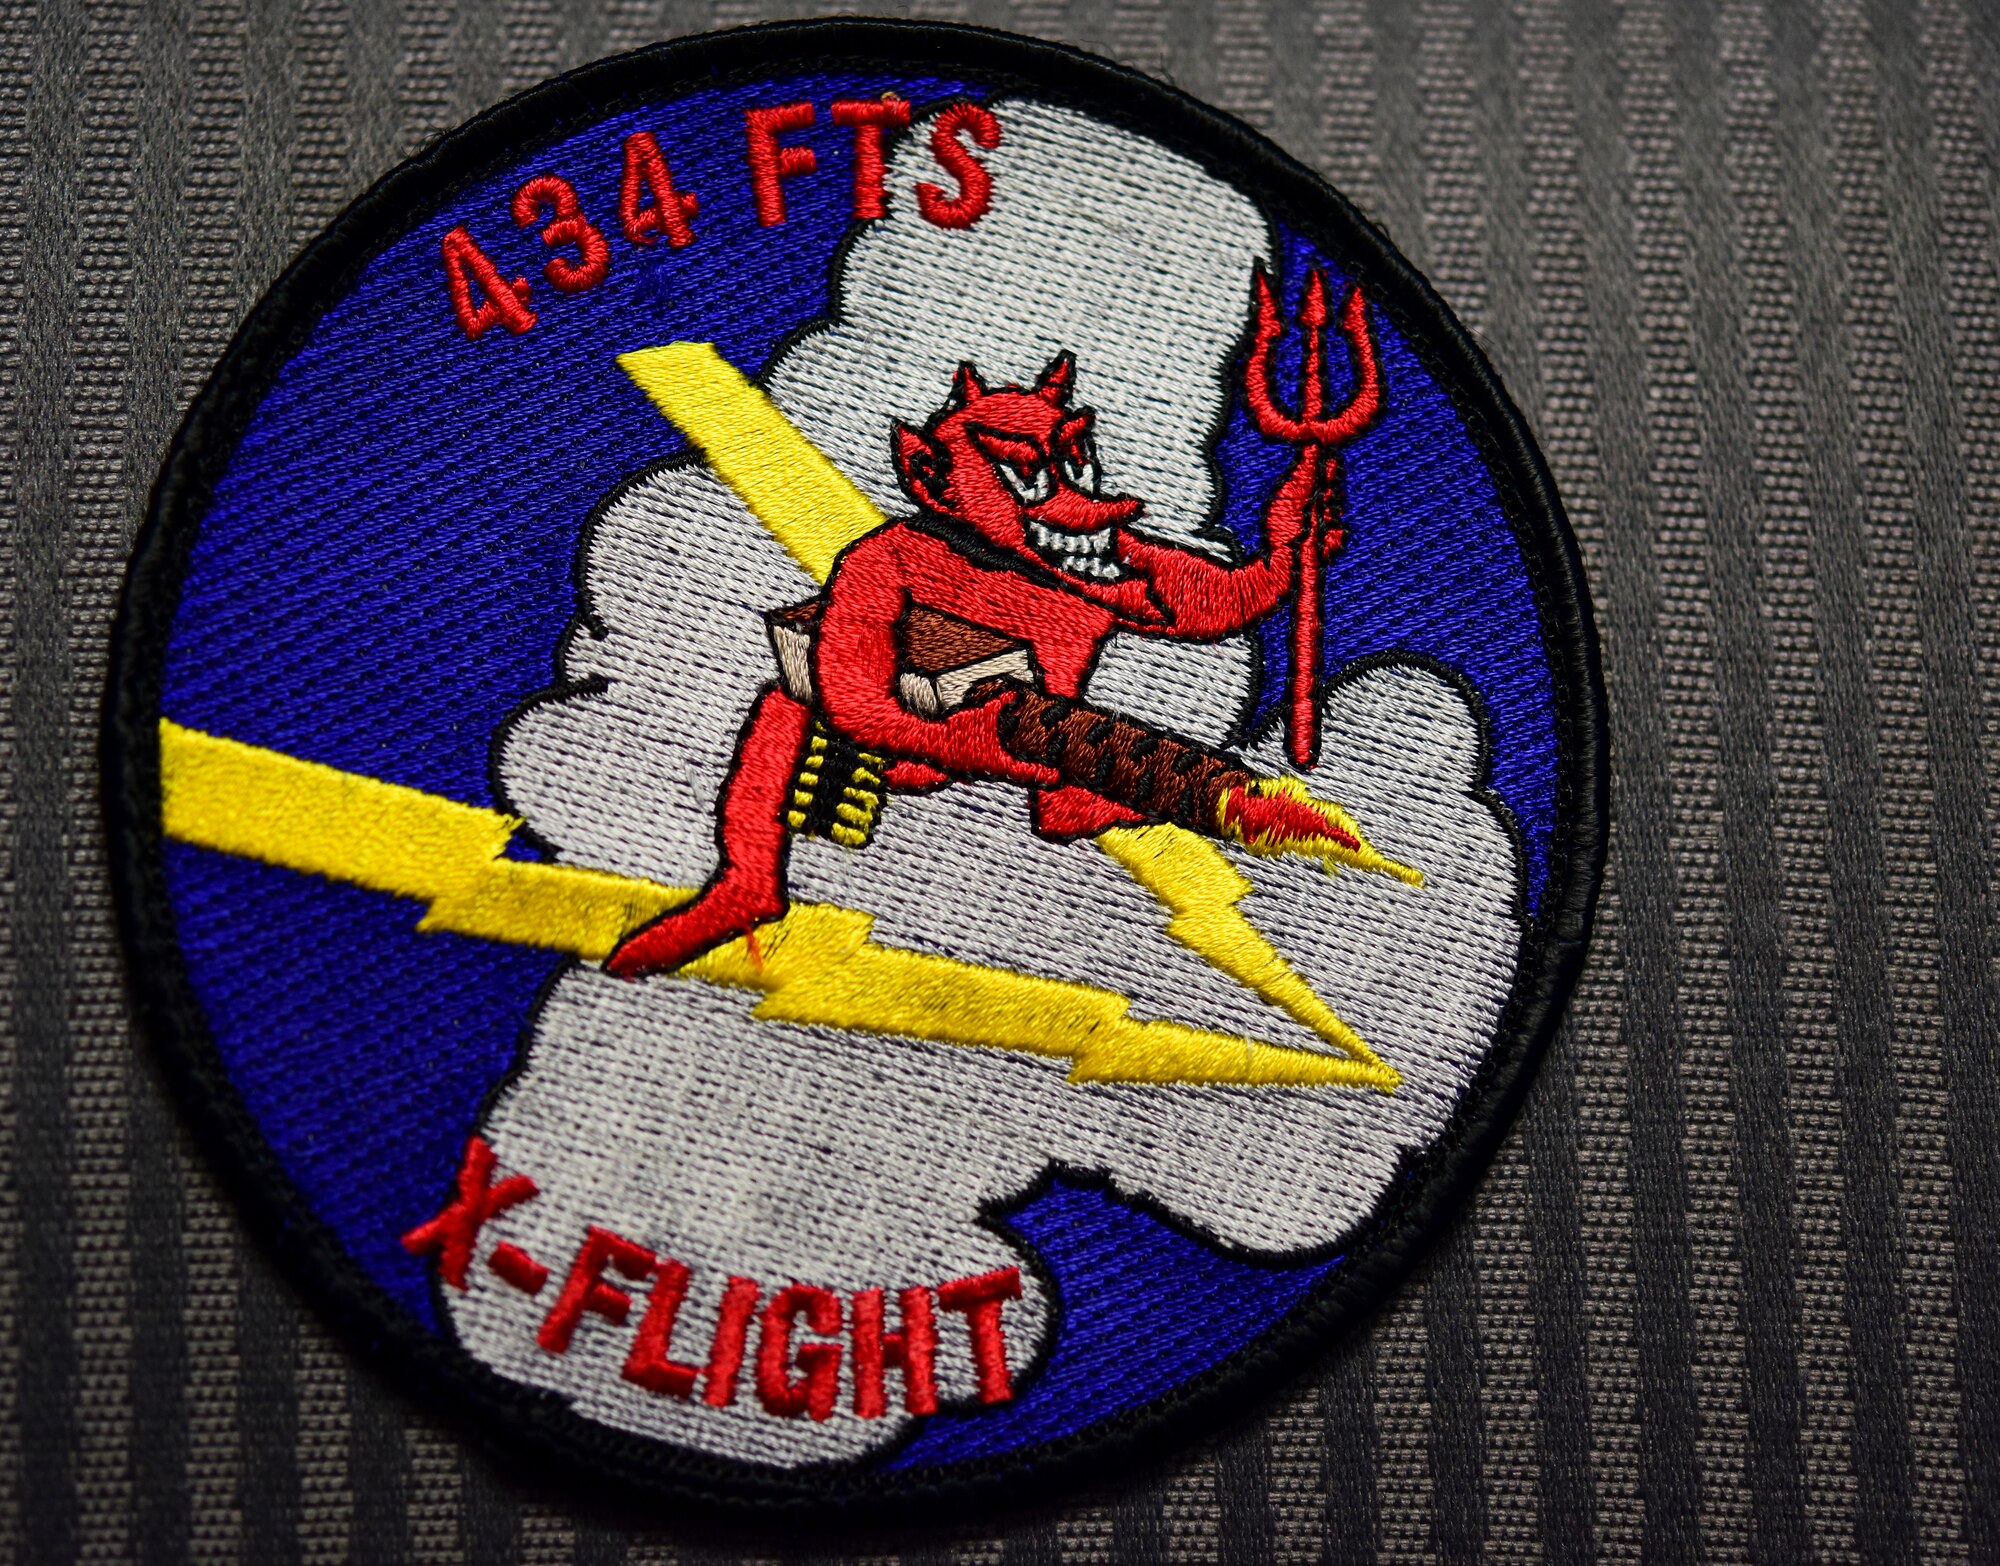 An X flight, also known as Lightning flight, of the 434th Flying Training Squadron at Laughlin Air Force Base, Texas, patch rests on the back of a chair in the flight commander’s office. As a flight commander, Capt. Joshua White, 434th FTS instructor pilot, is among the first echelons responsible for safely and efficiently scheduling people, the mission, and aircraft. His job is to keep the flight pointed in the right direction and enable his instructor pilots to do their jobs. He also reports directly to his commander with trends, potential scheduling issues, and the overall "health" of the flight. “This has been by far the most rewarding job I have had in the Air Force, and although very demanding and exhausting, the people in the flight make it all worthwhile, White said. “We have to be as transparent as possible and let the students know we are all in this together. It will not be the first time in their career that they are faced with difficult times, so it's important to remind them why they choose to come here and keep them focused on the prize and not the pandemic.” (U.S. Air Force photo by Senior Airman Anne McCready)